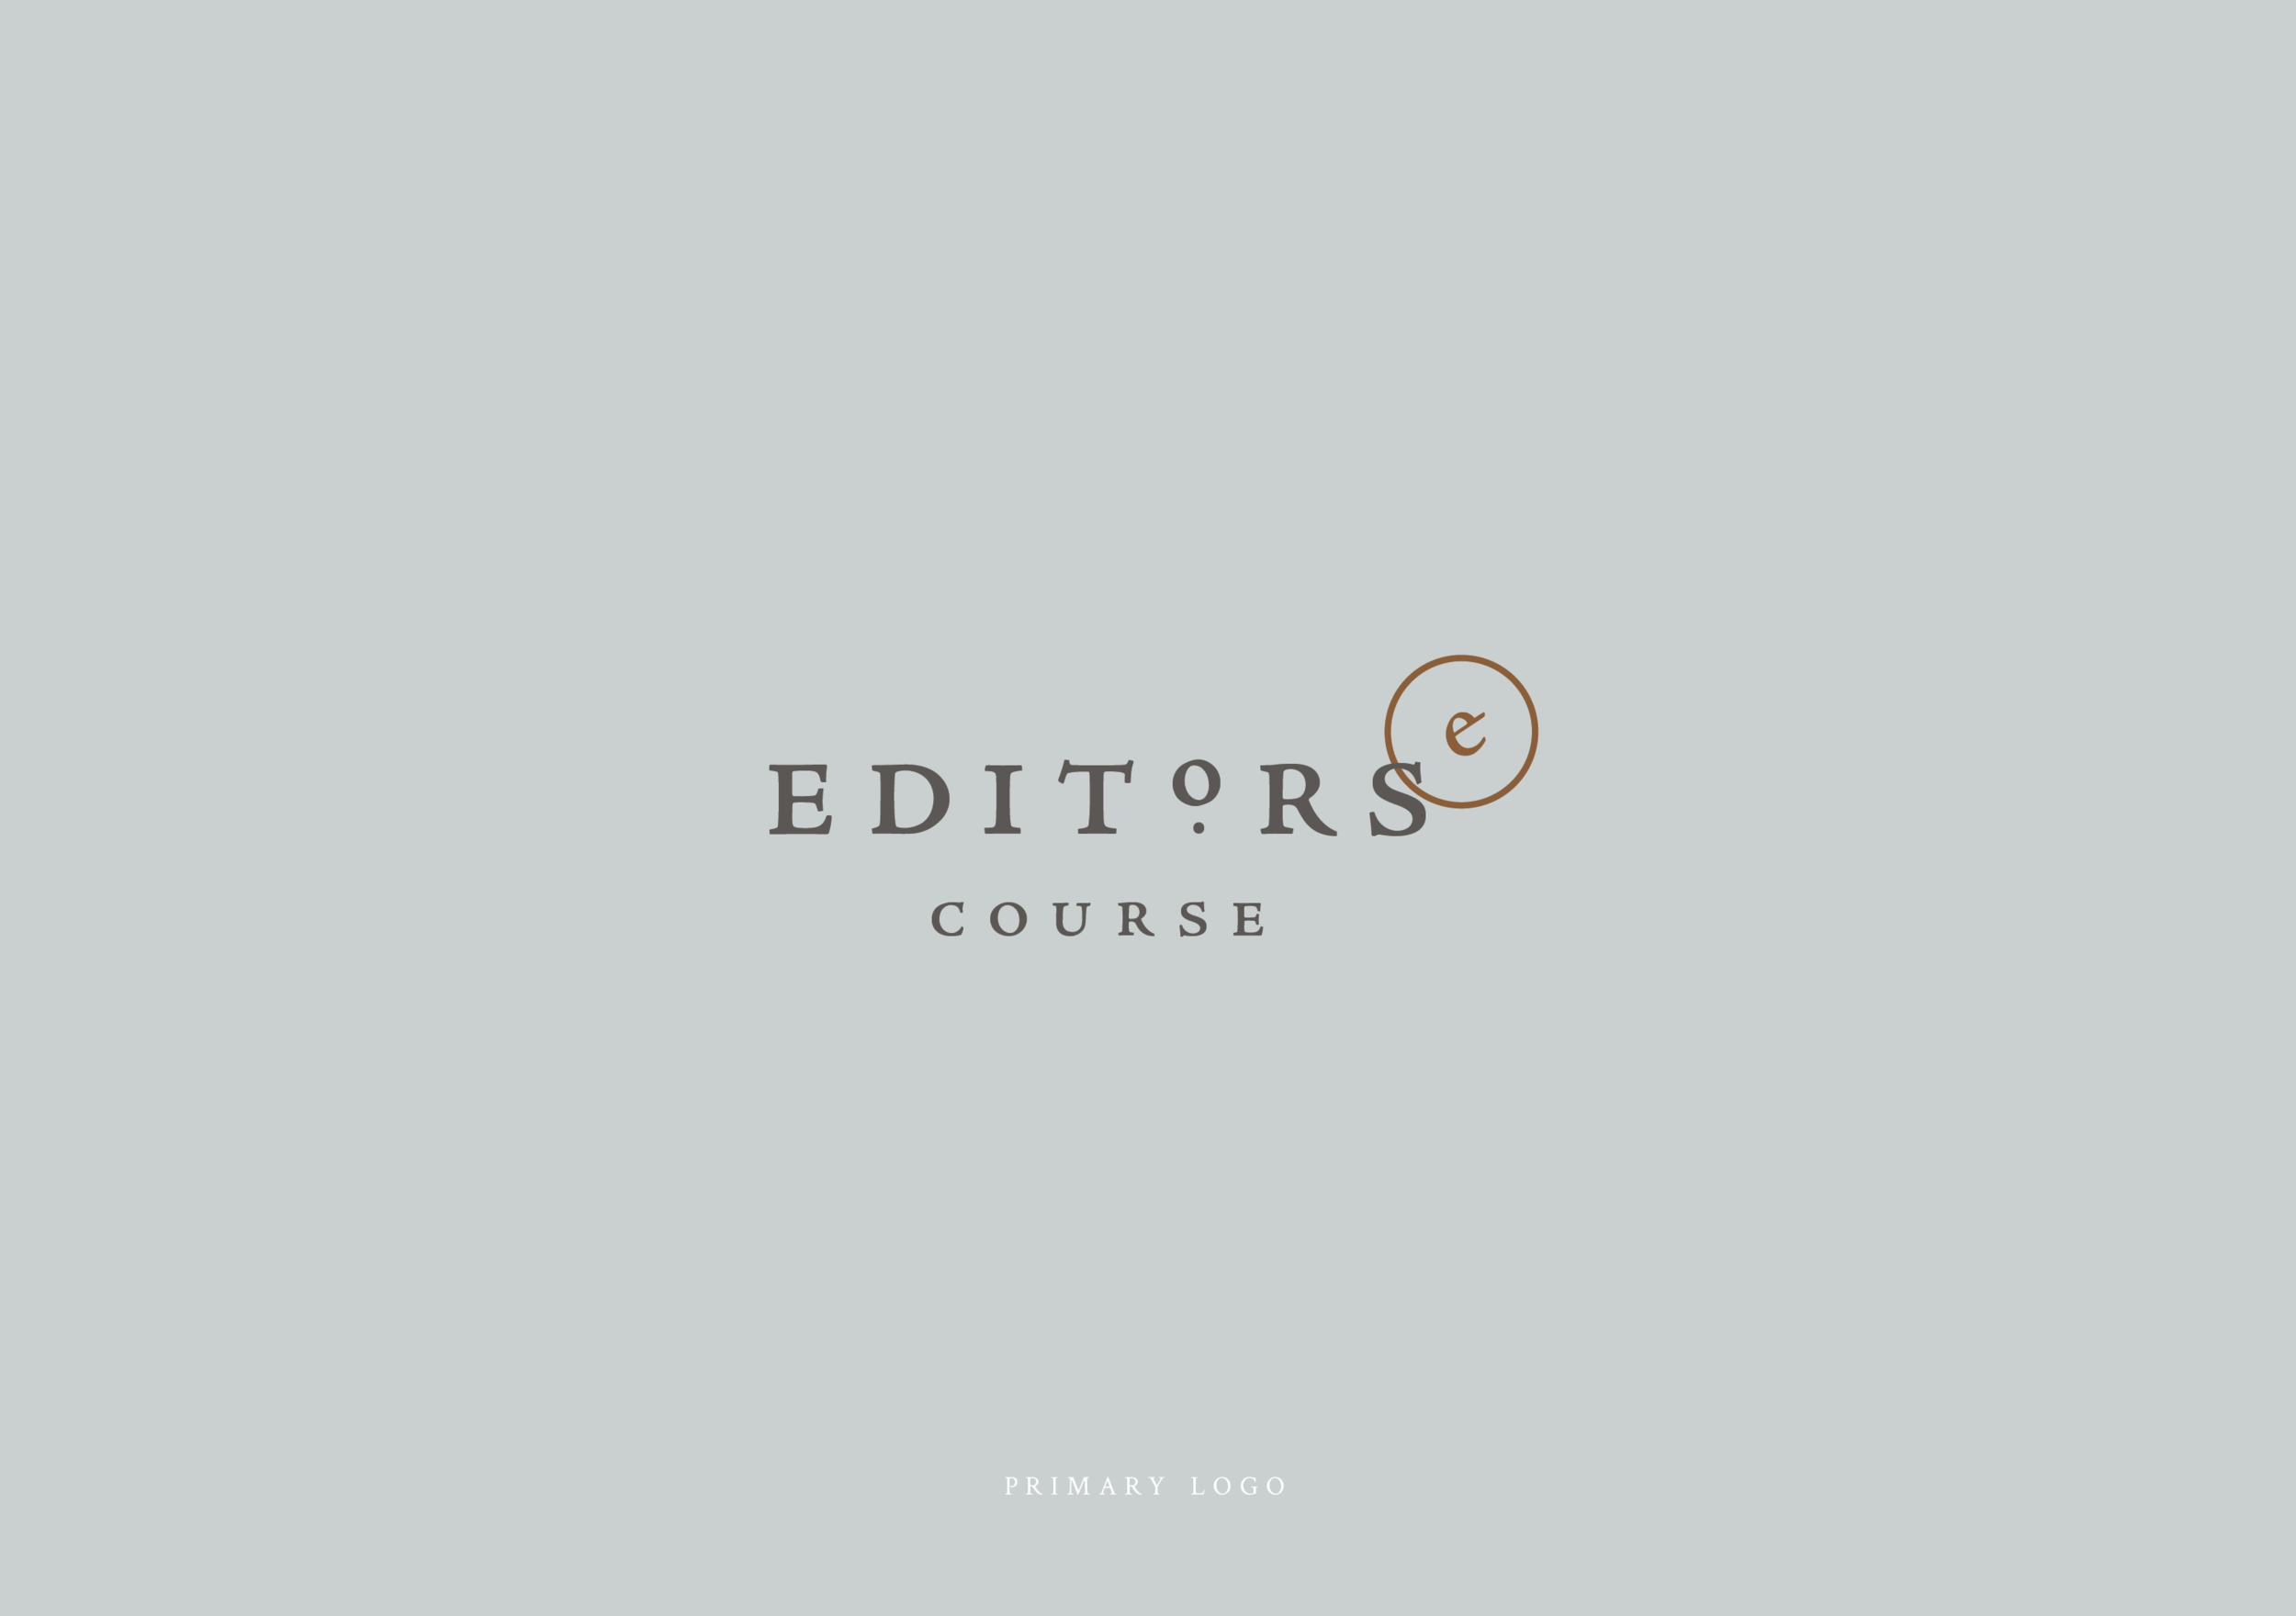 Editors-Course-Andrea-Crouse-Design_Branding Summary-01.png